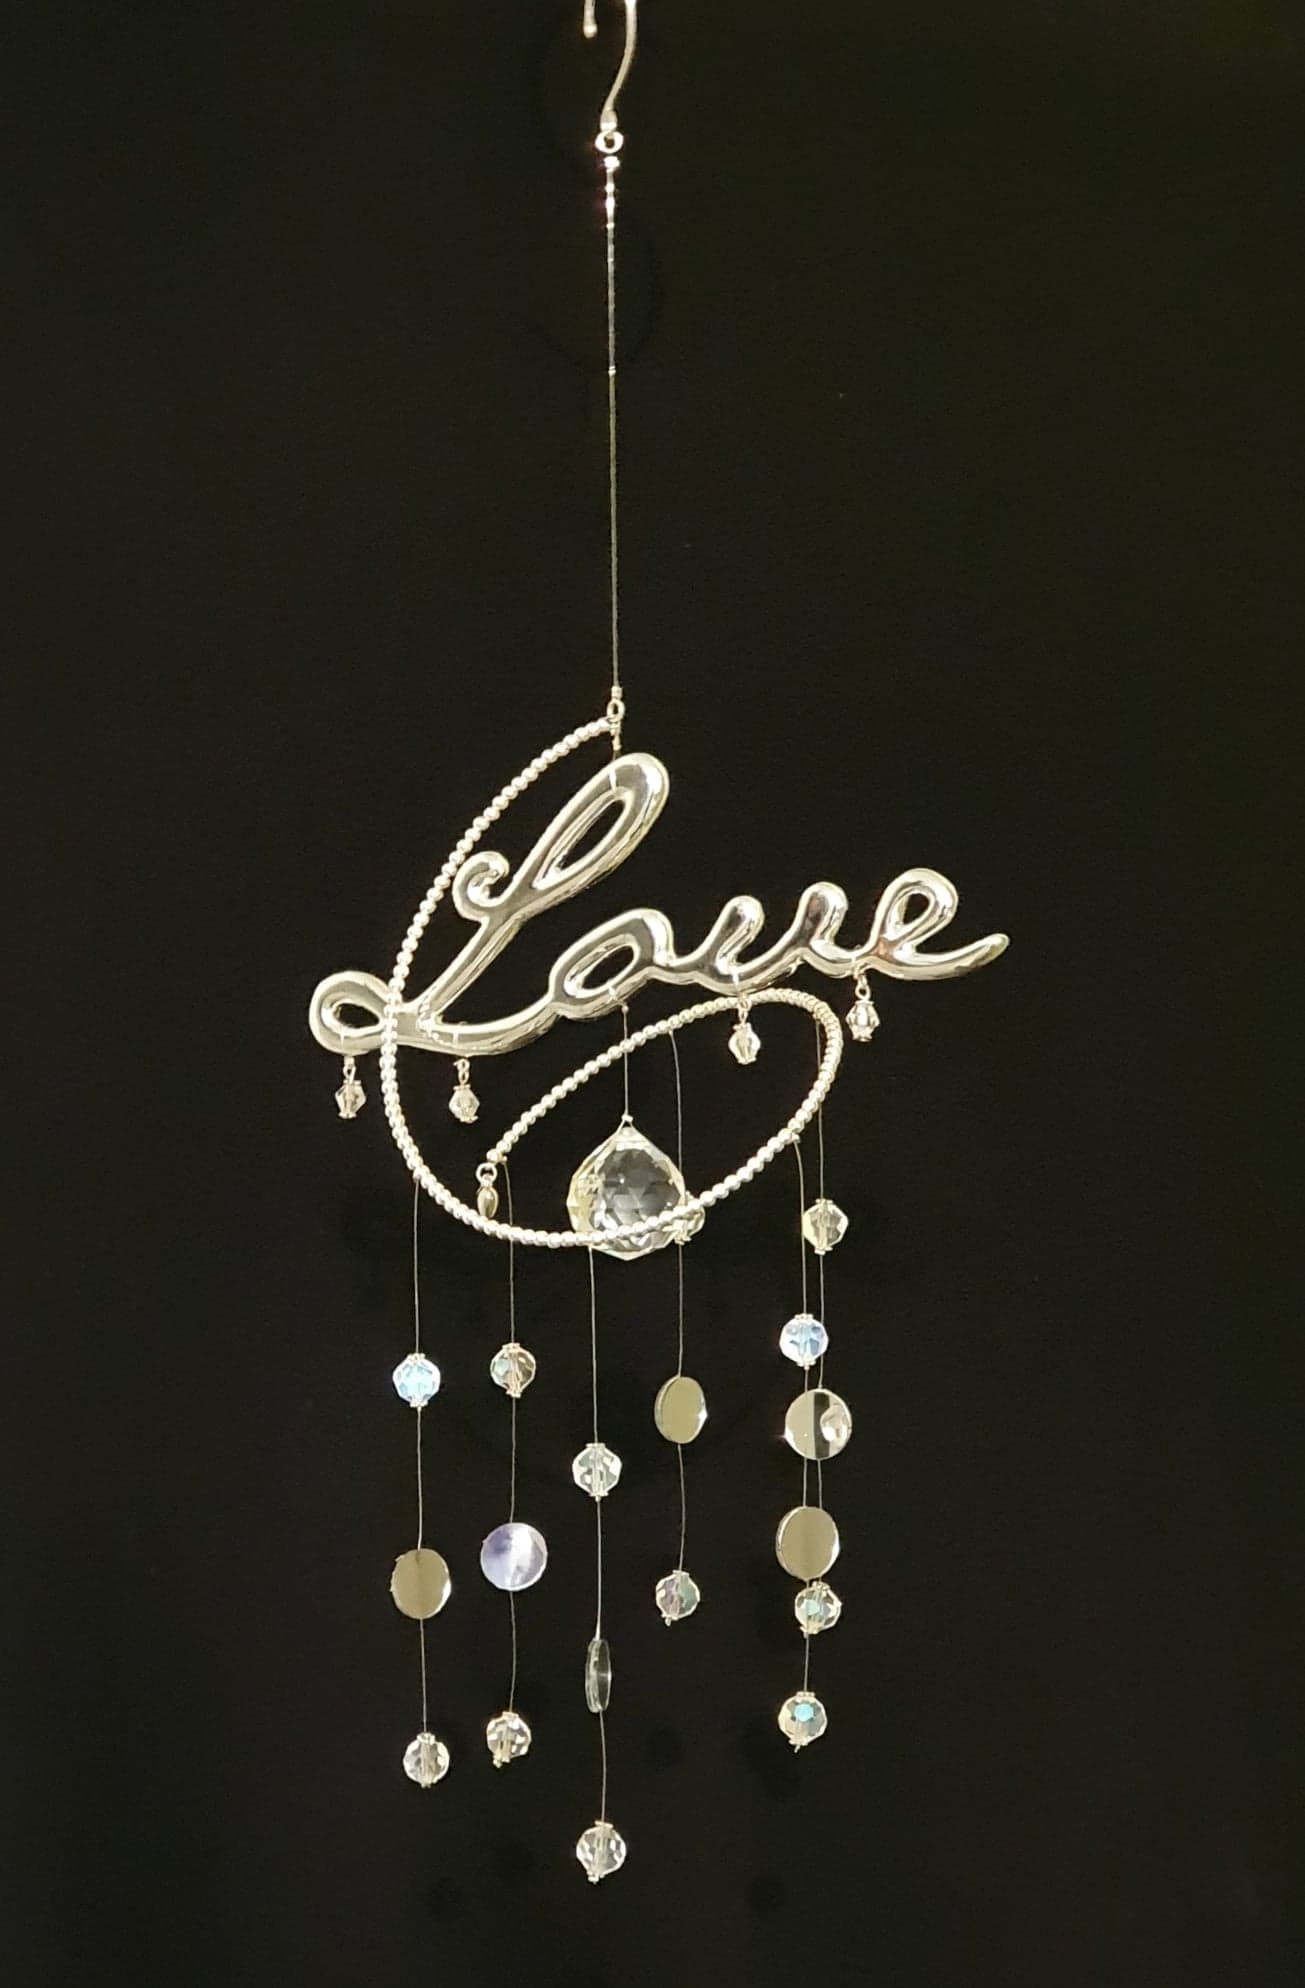 "Love" spiral suncatcher with AB clear crystals and mirrors